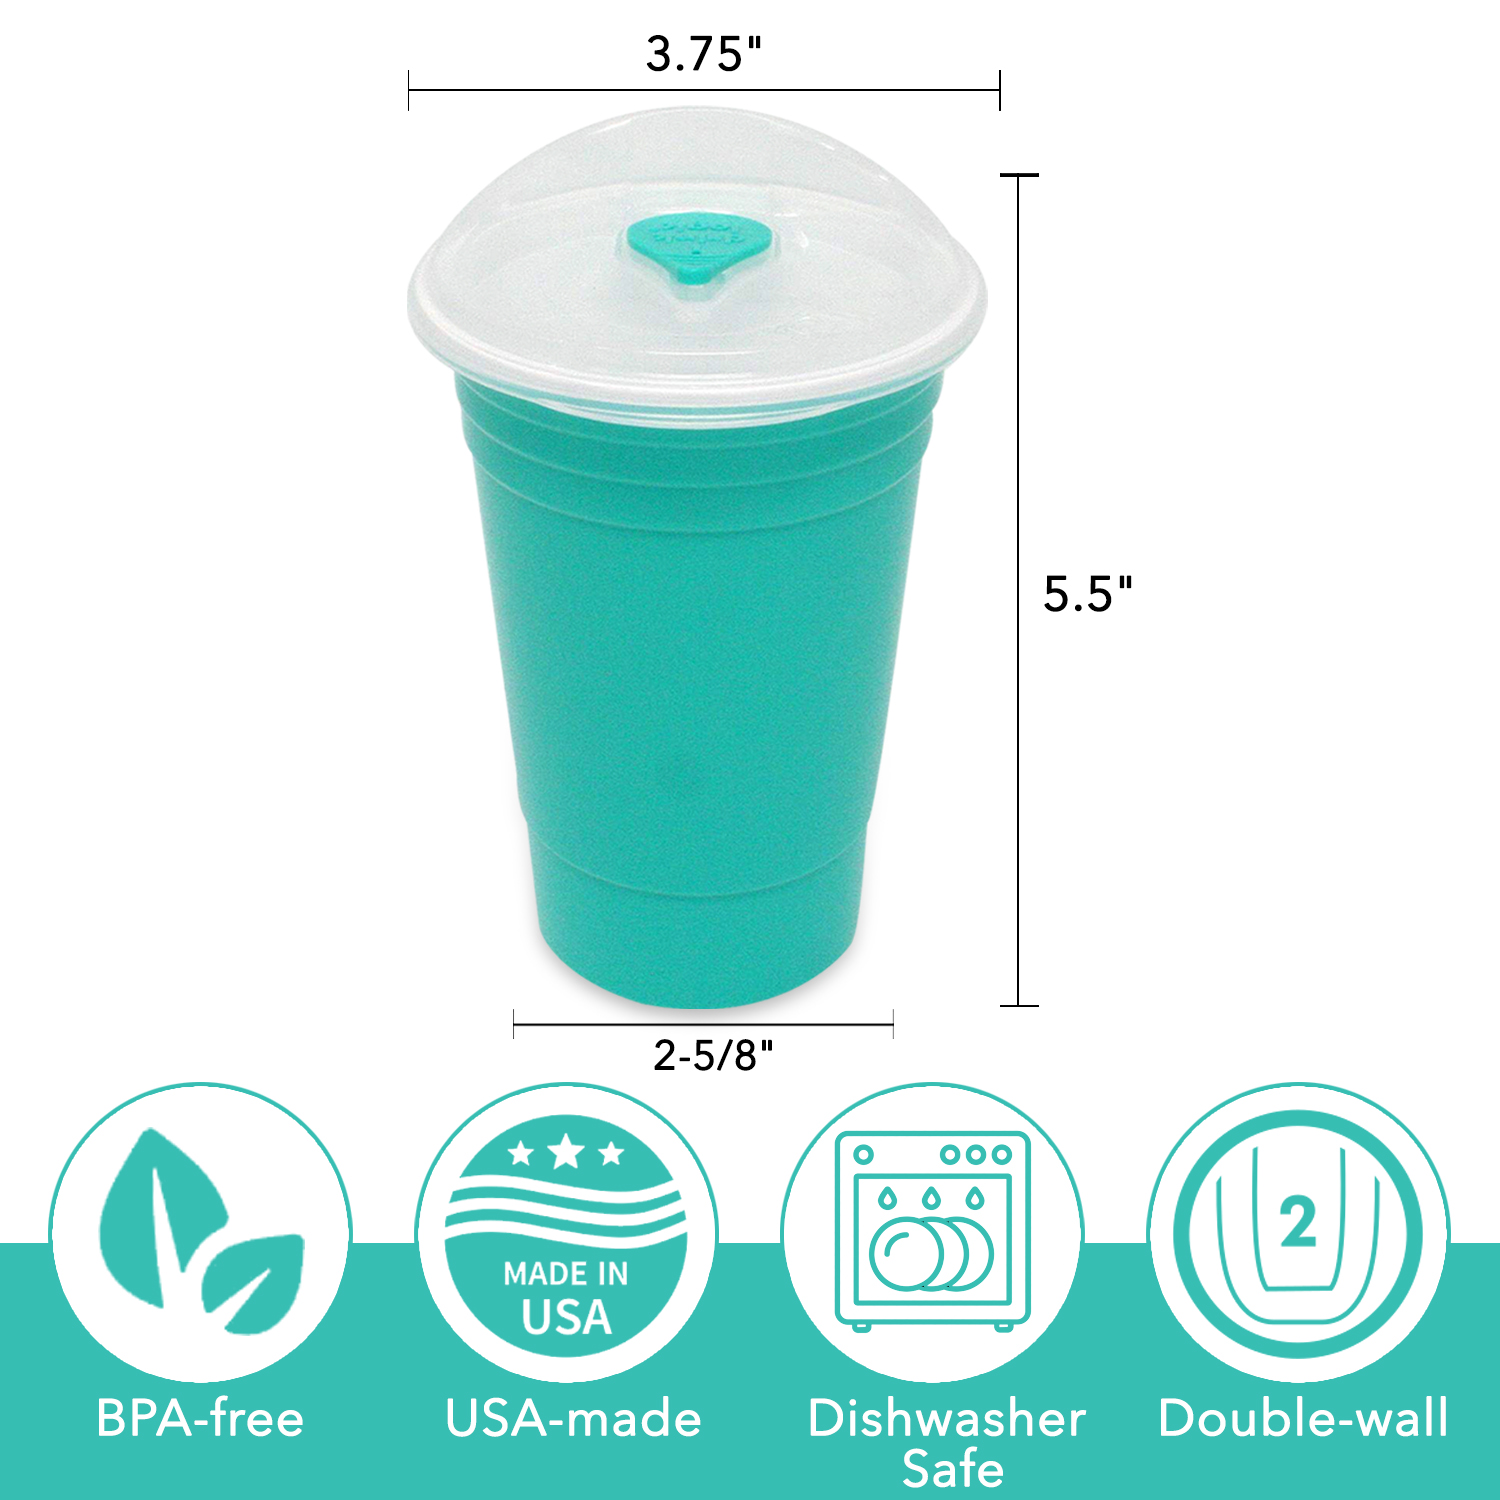 12oz Reusable Plastic Kids Cups, BPA-Free, Made in USA, Dishwasher Safe